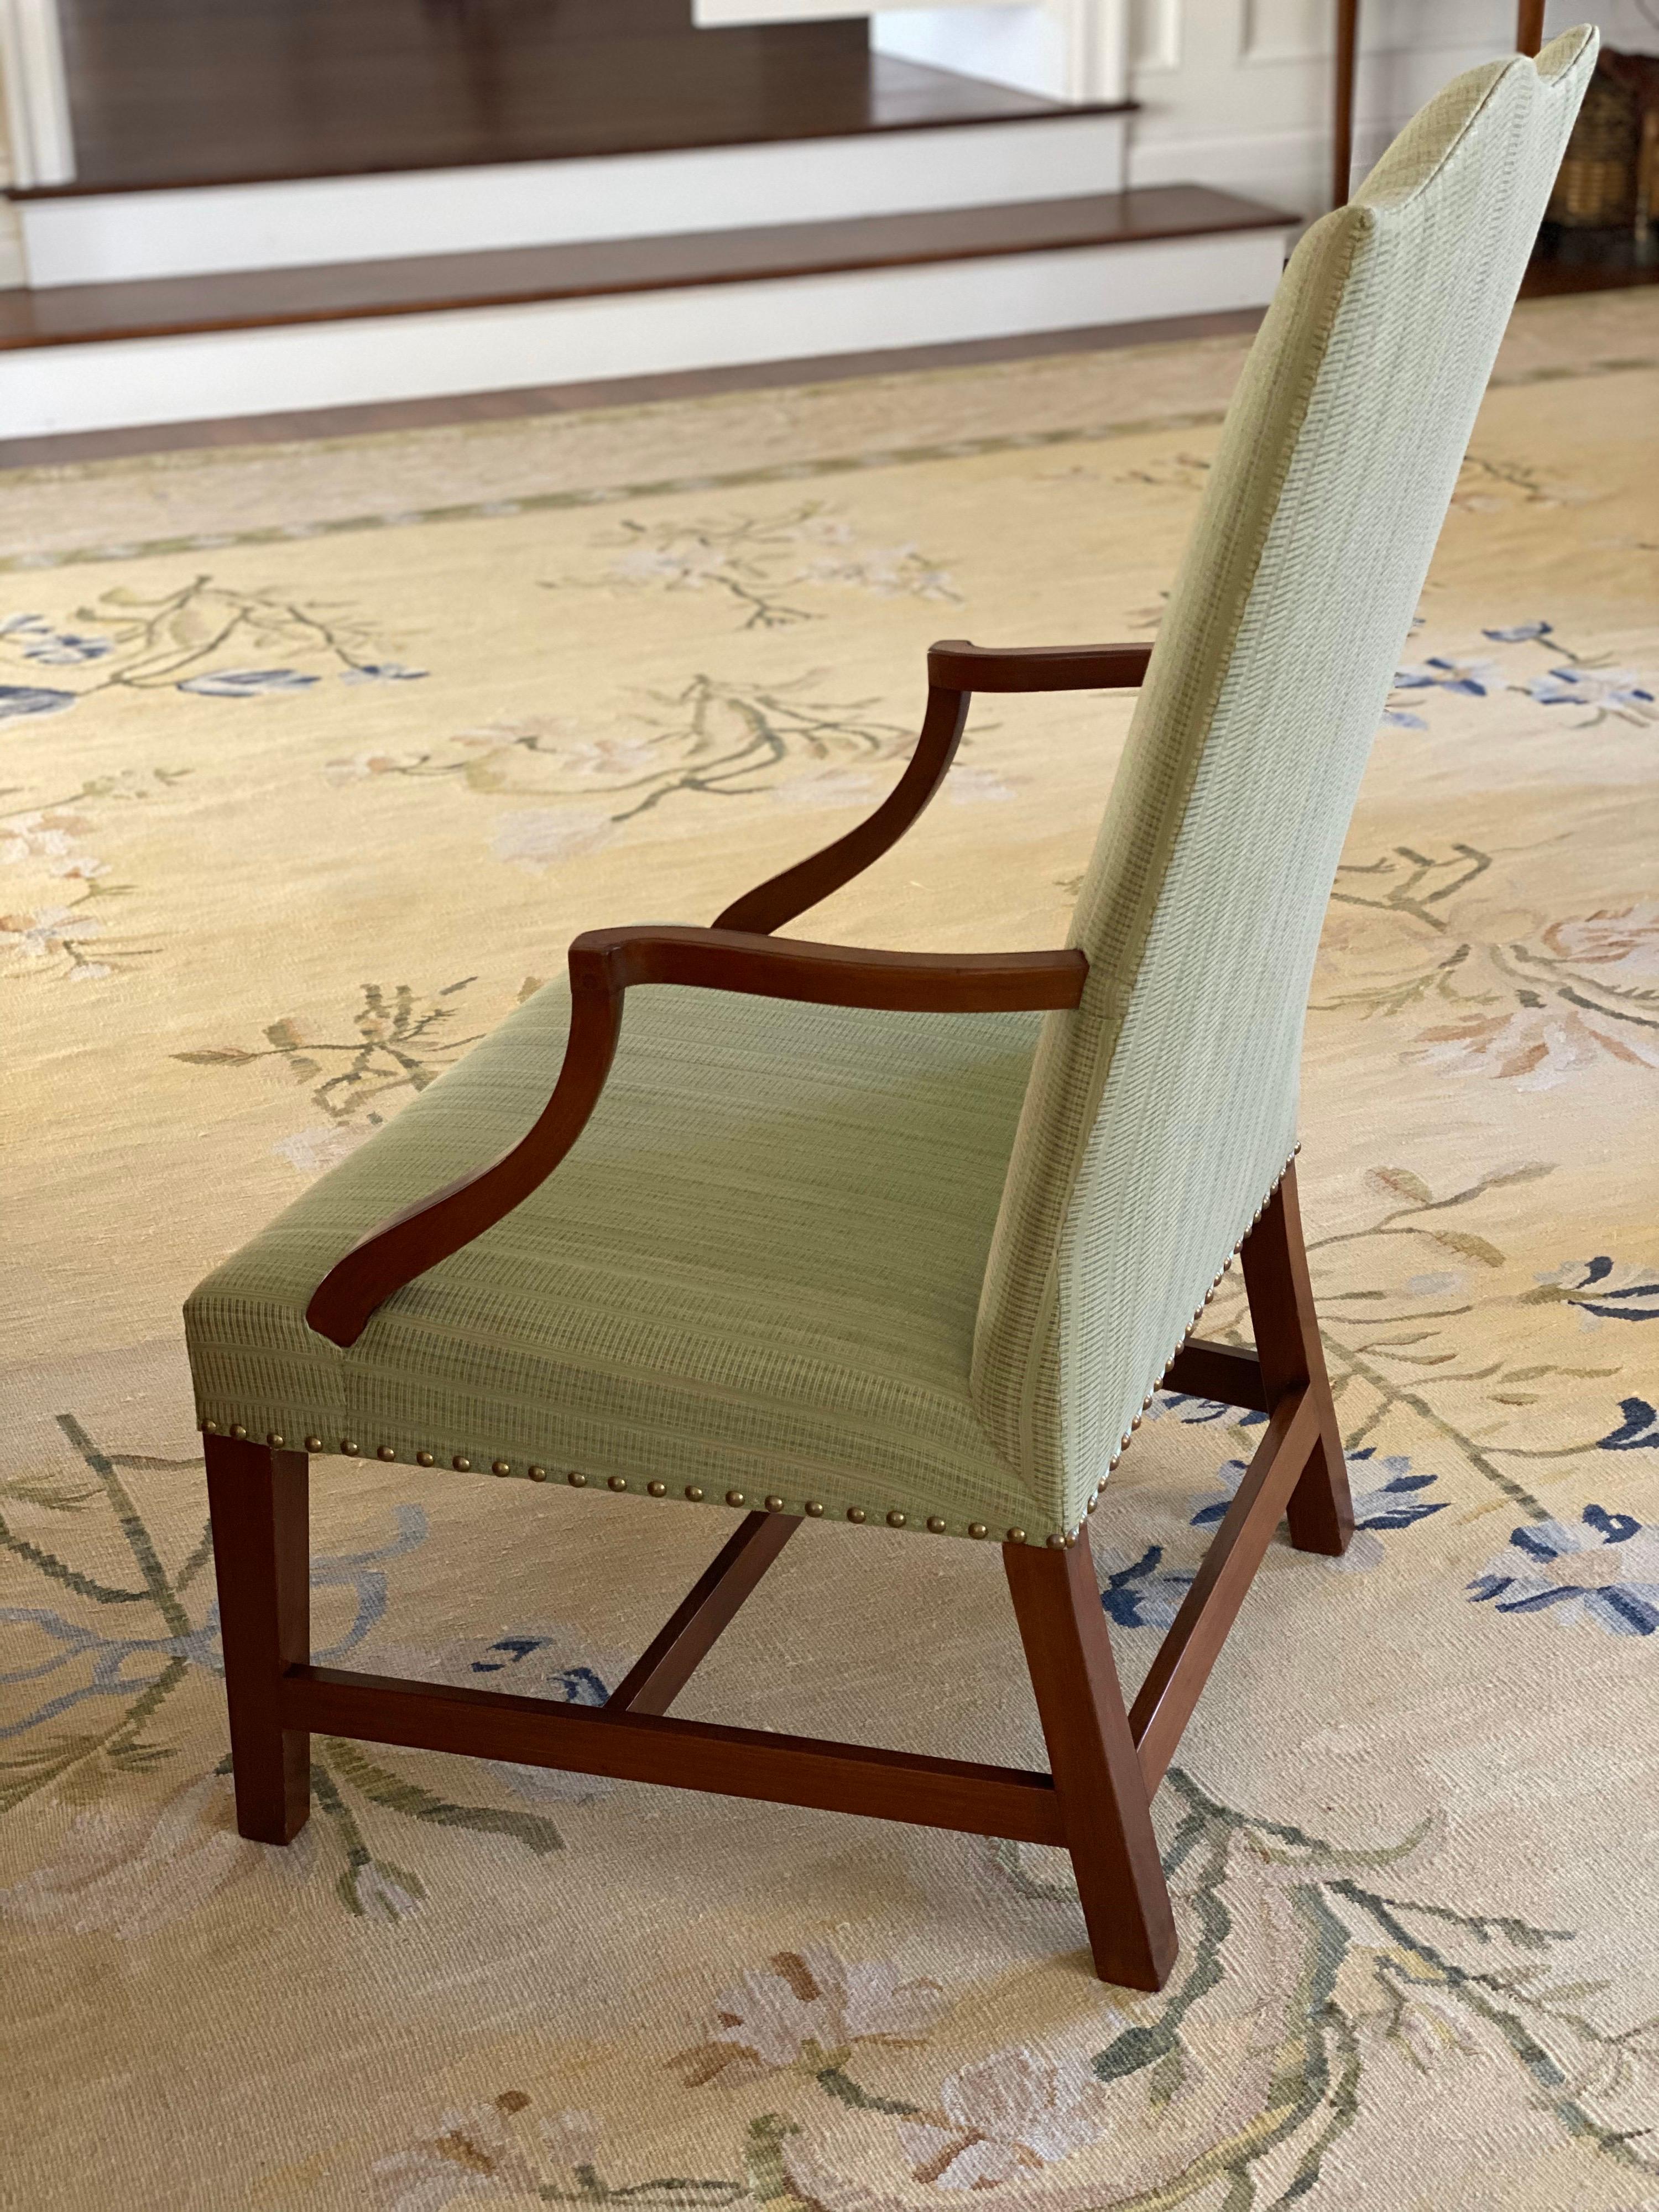 Mahogany 18th Century Federal Hepplewhite Lolling Chair For Sale